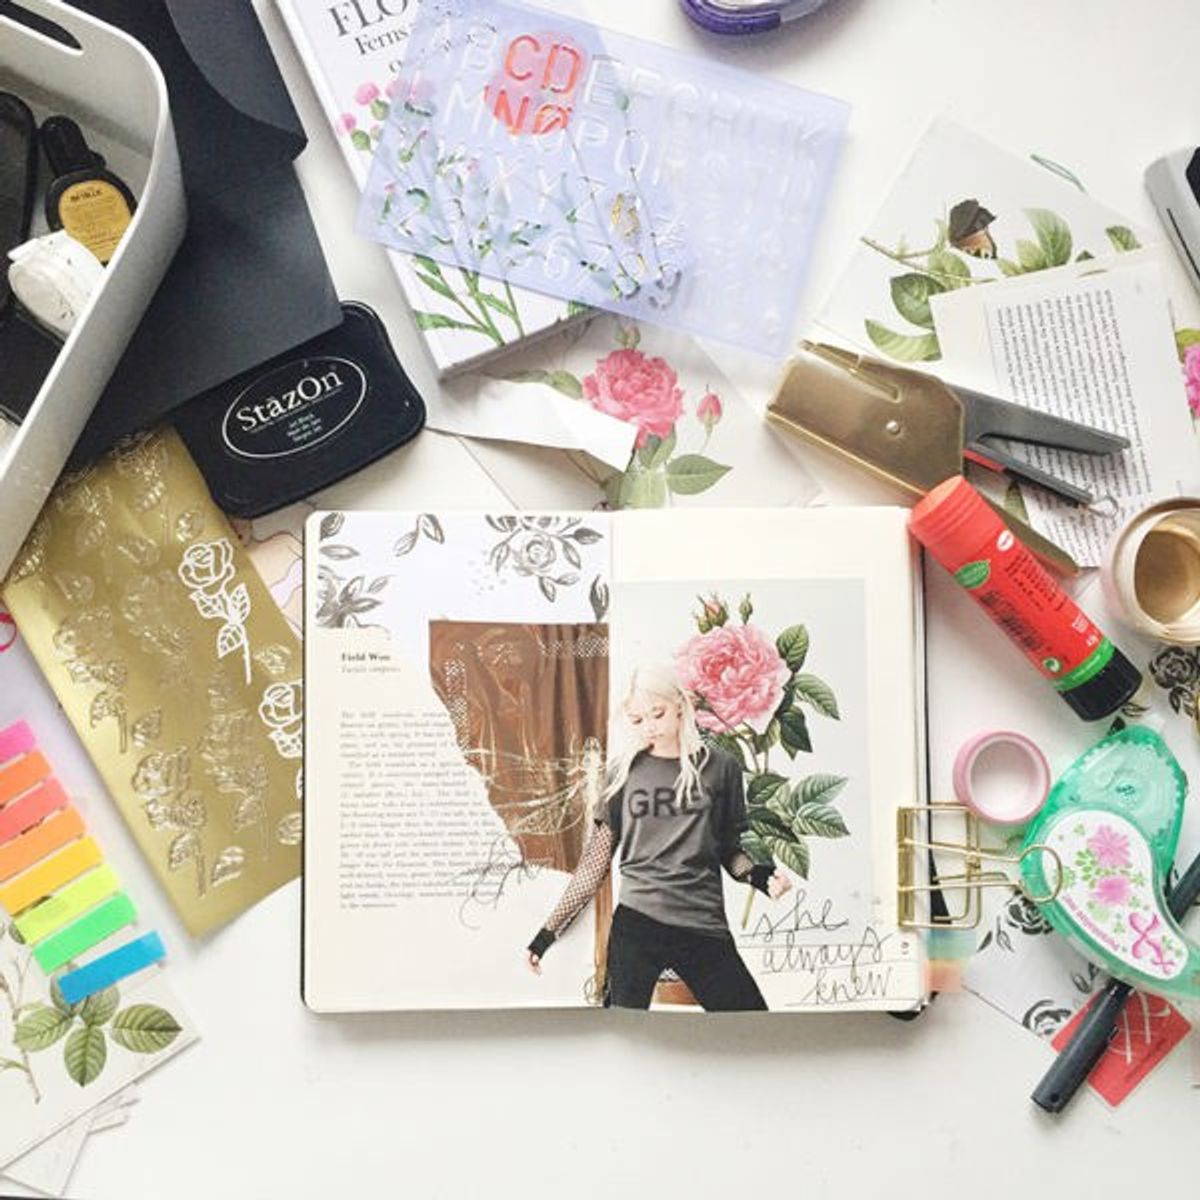 8 Reasons to Start a Self-Care Journal